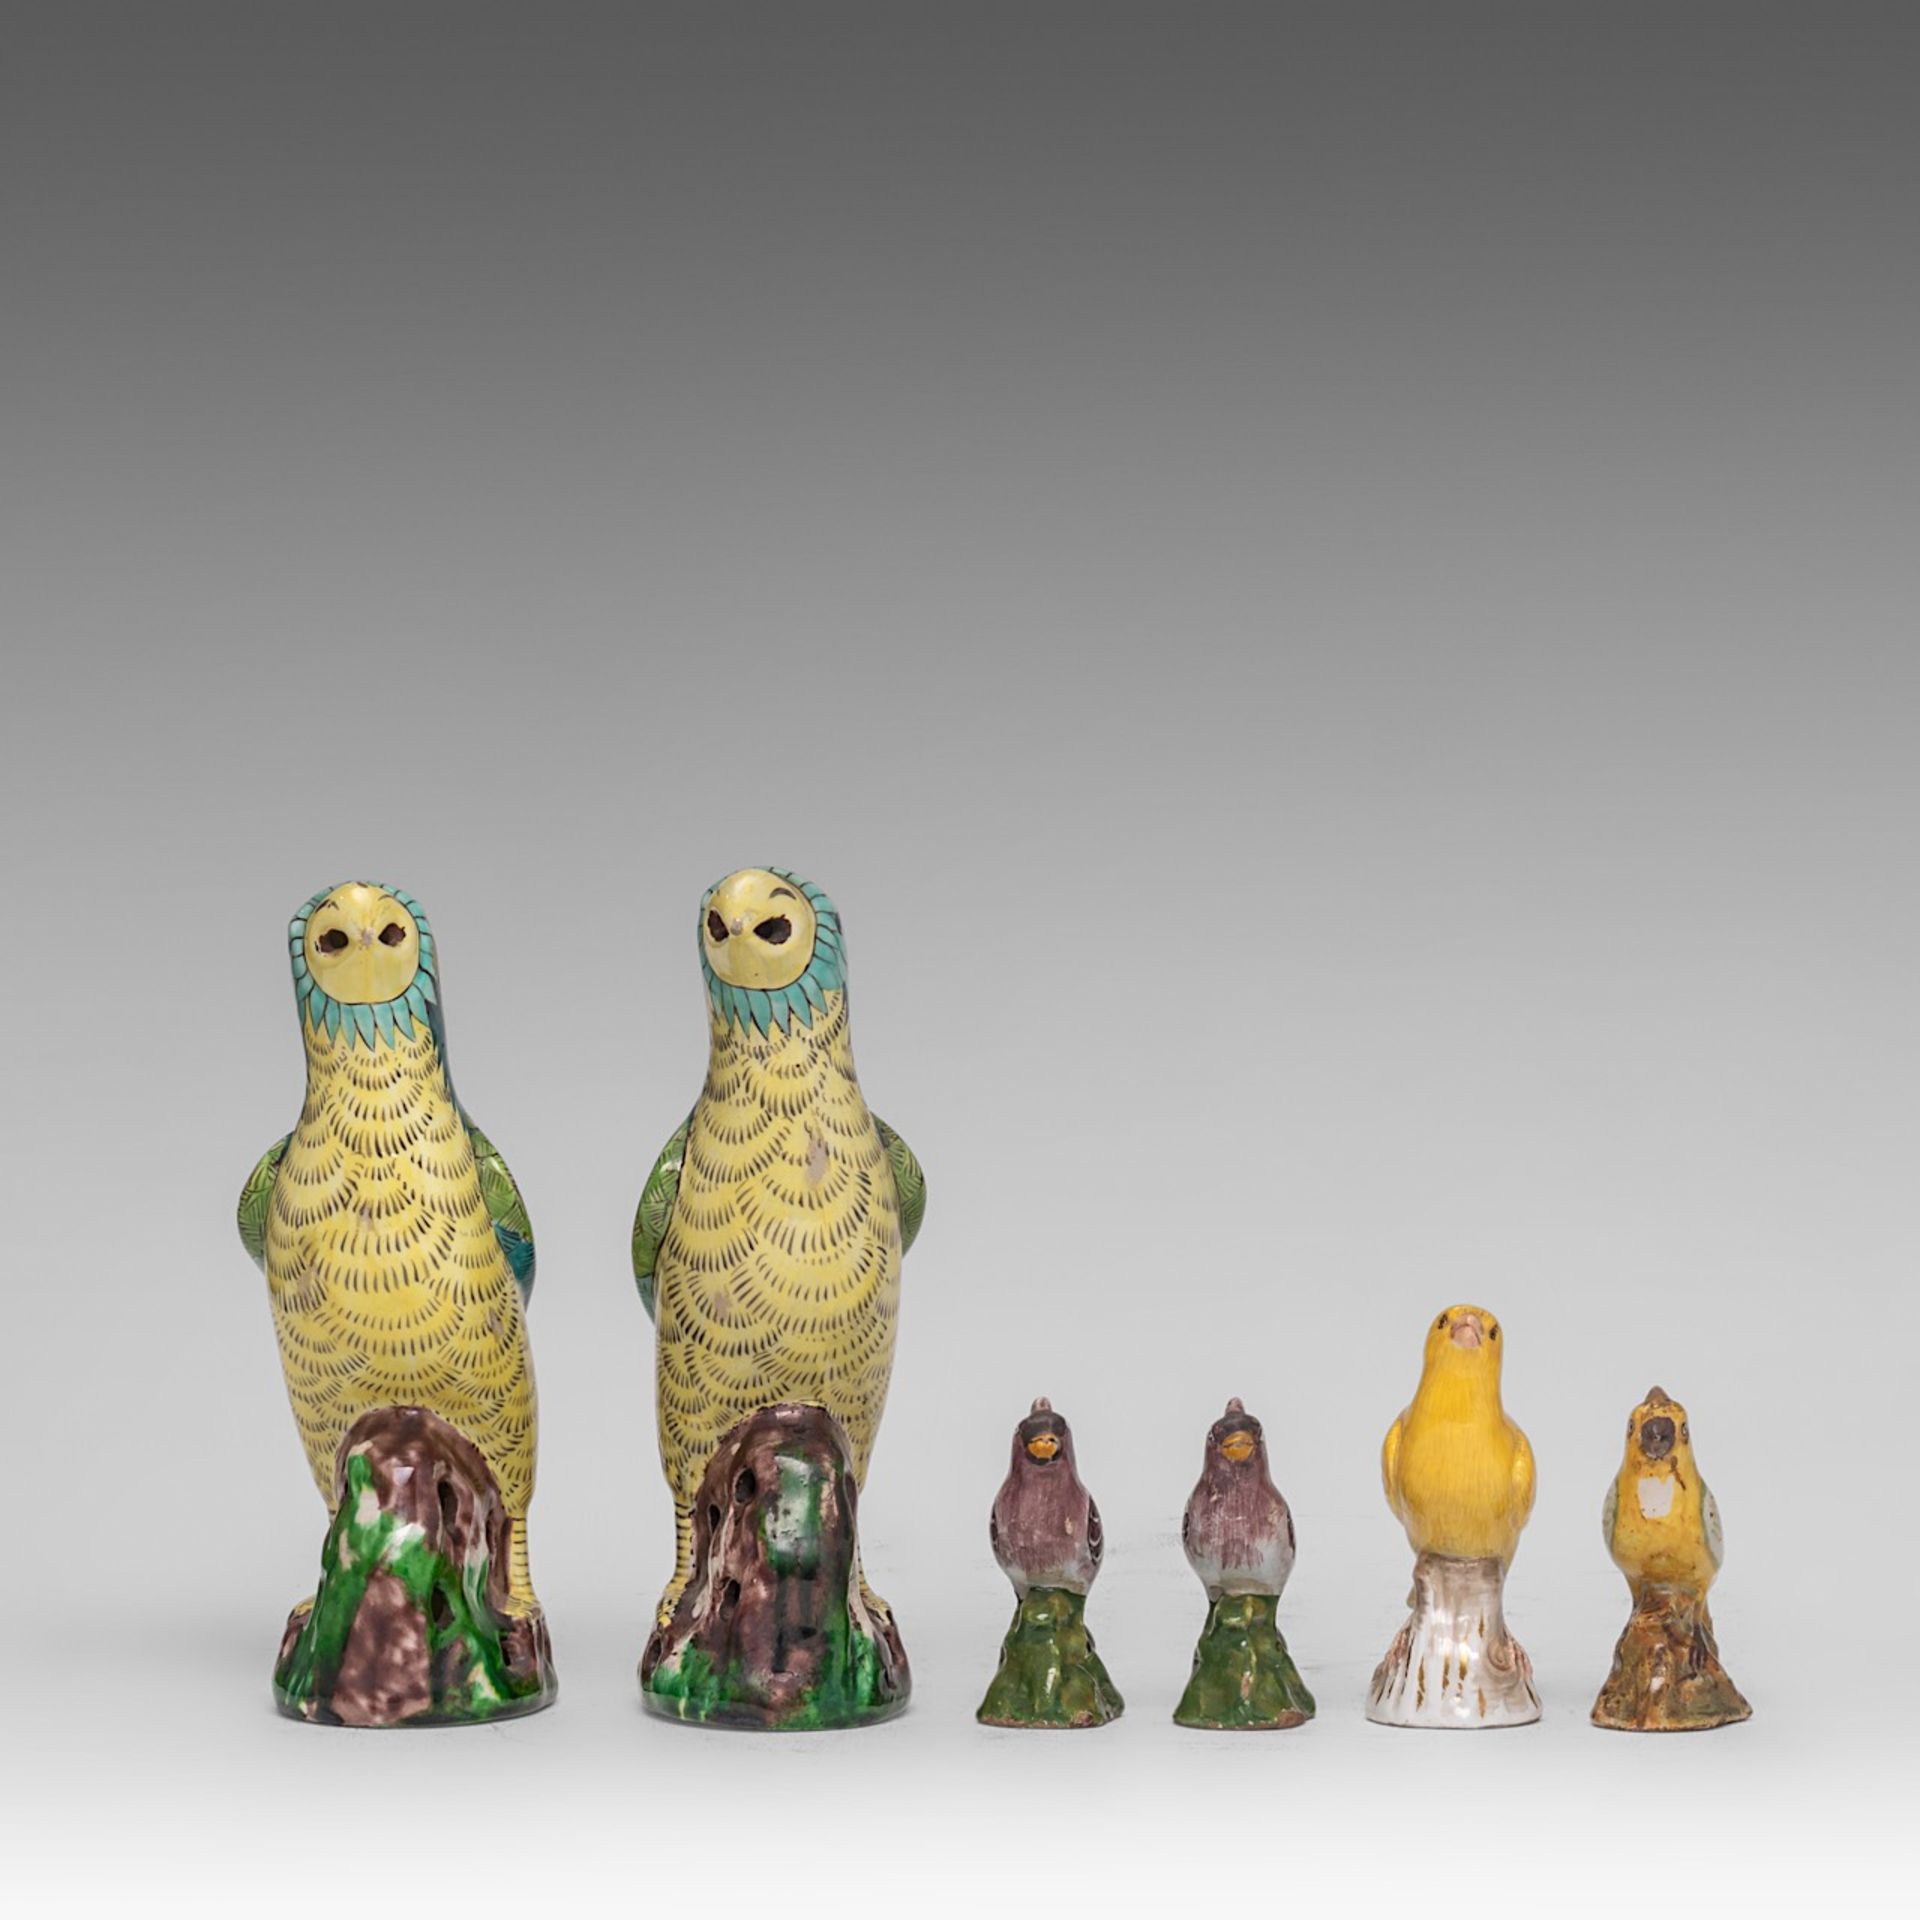 A collection of 6 faience and porcelain bird figurines, Delft, Meissen and others, H 20 cm (tallest) - Image 4 of 5